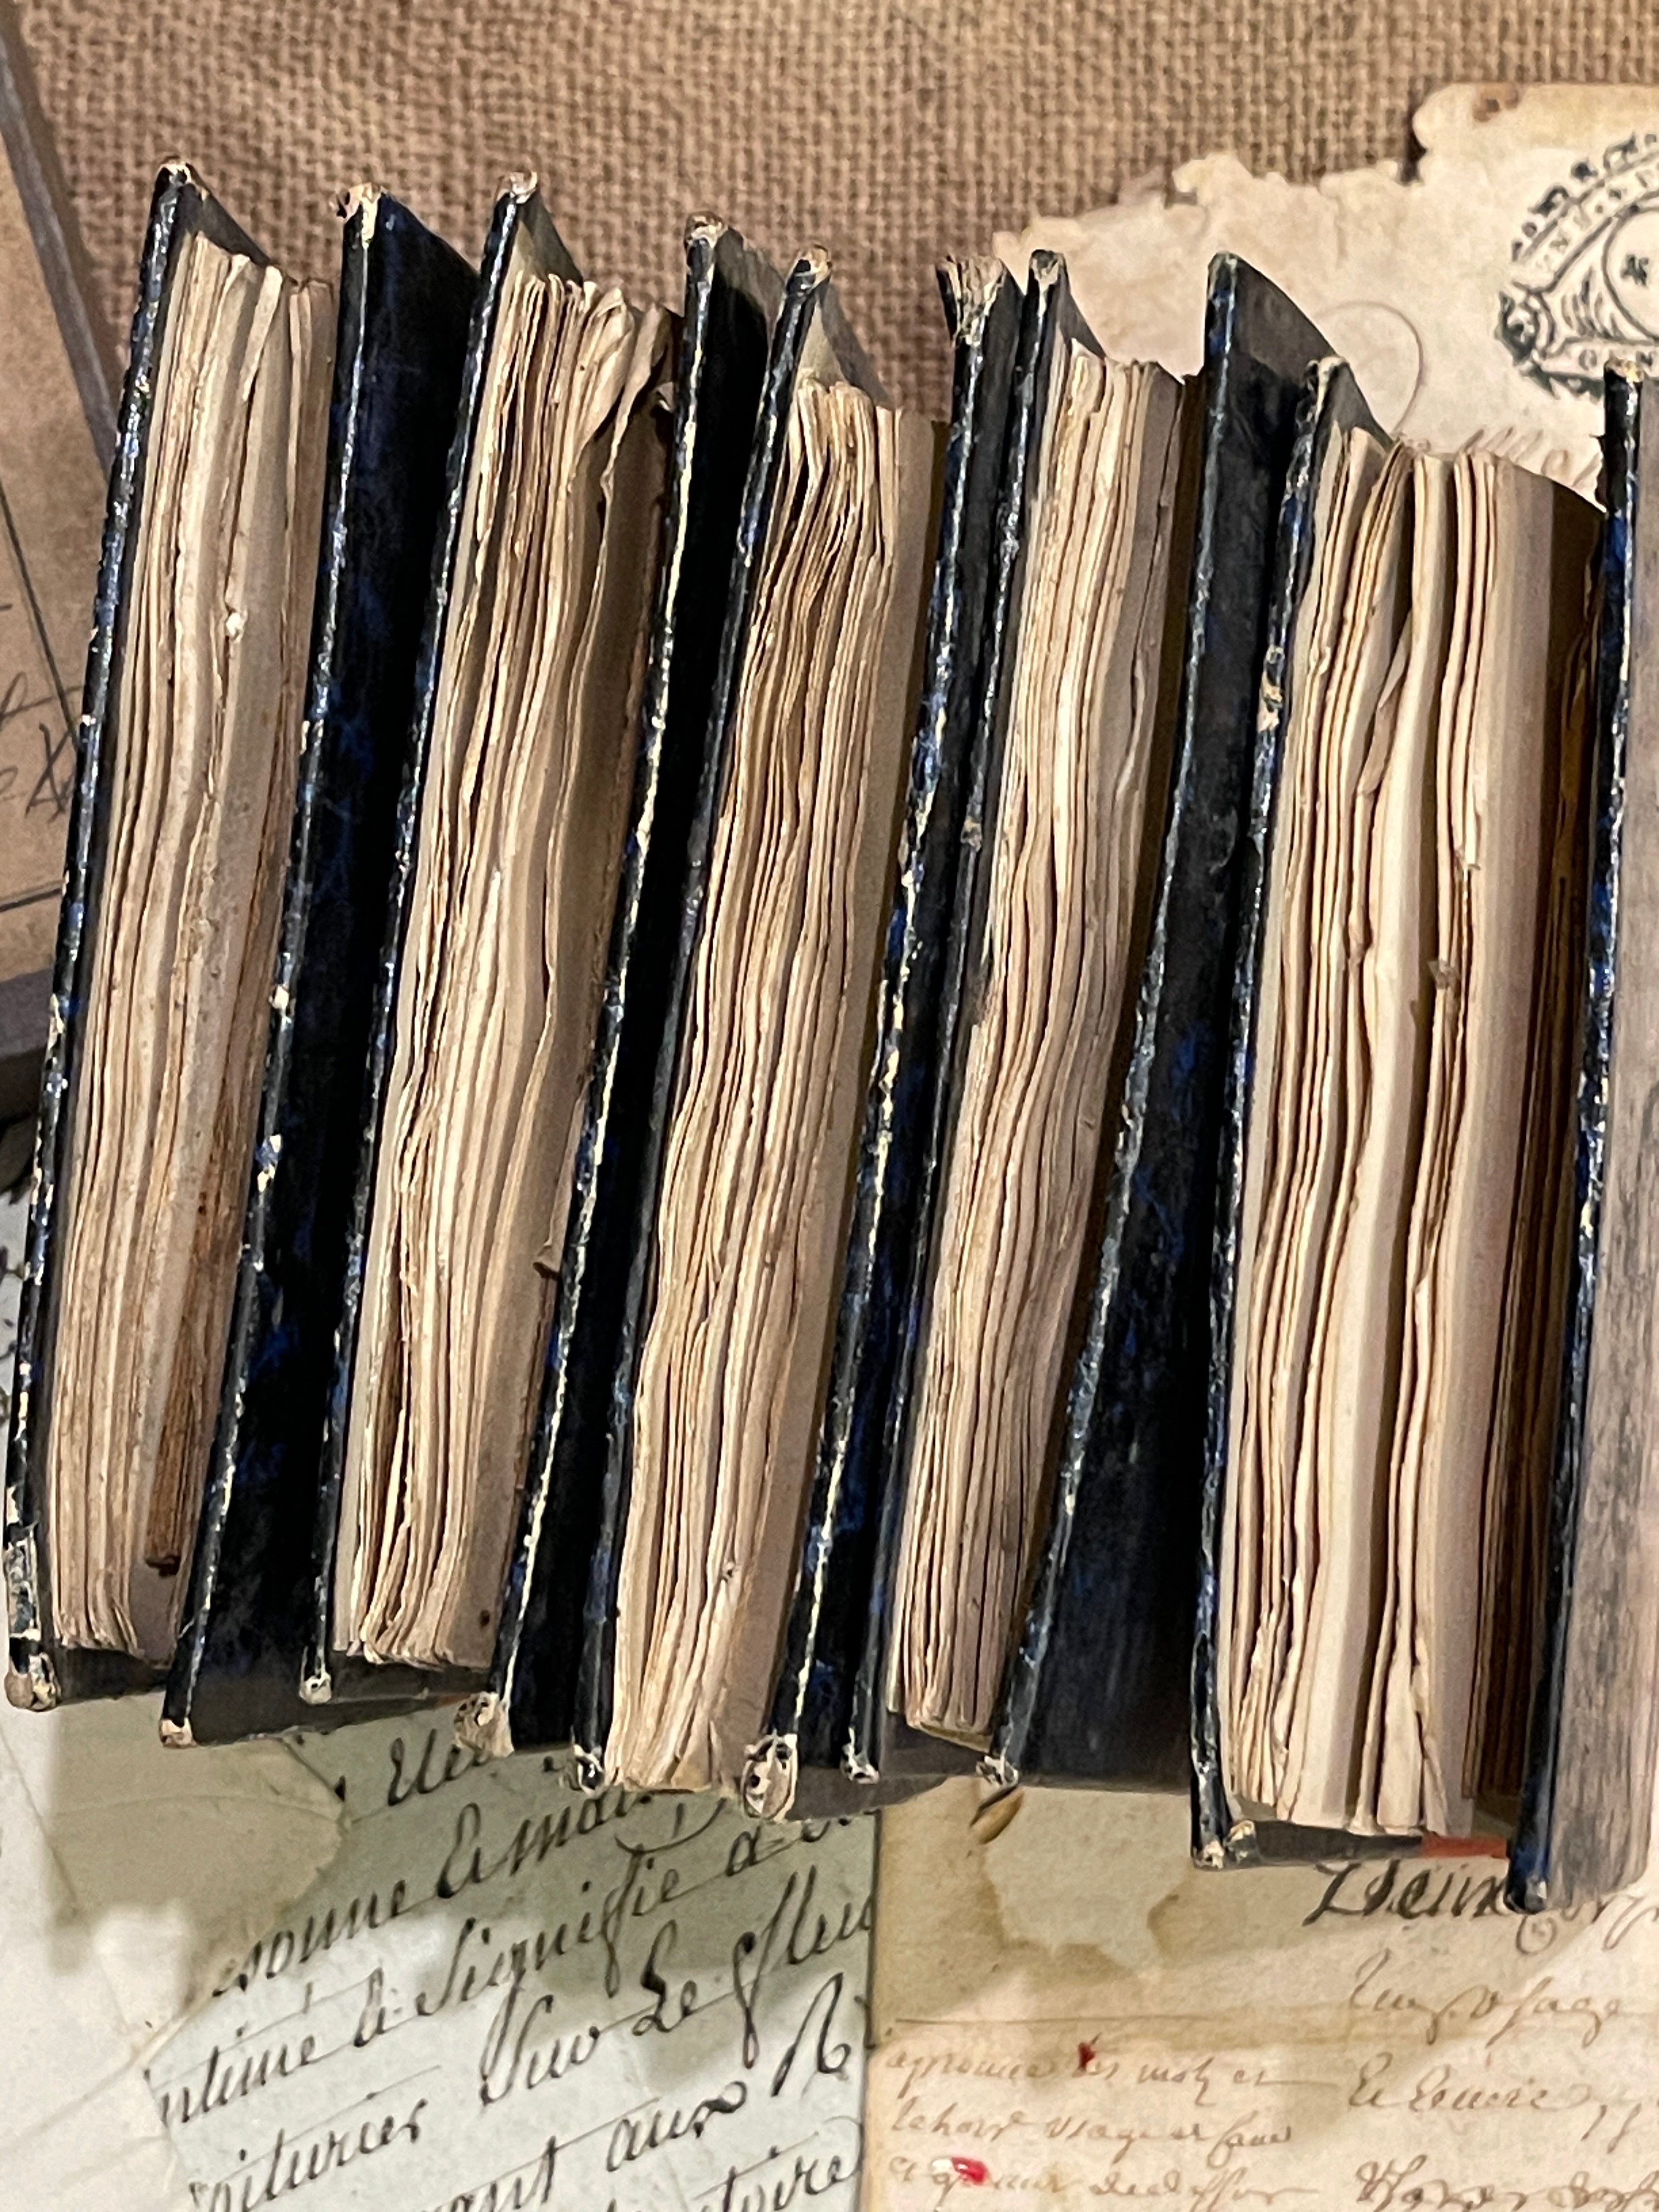 Beautiful Mini French Scrapbooks over 100 years old